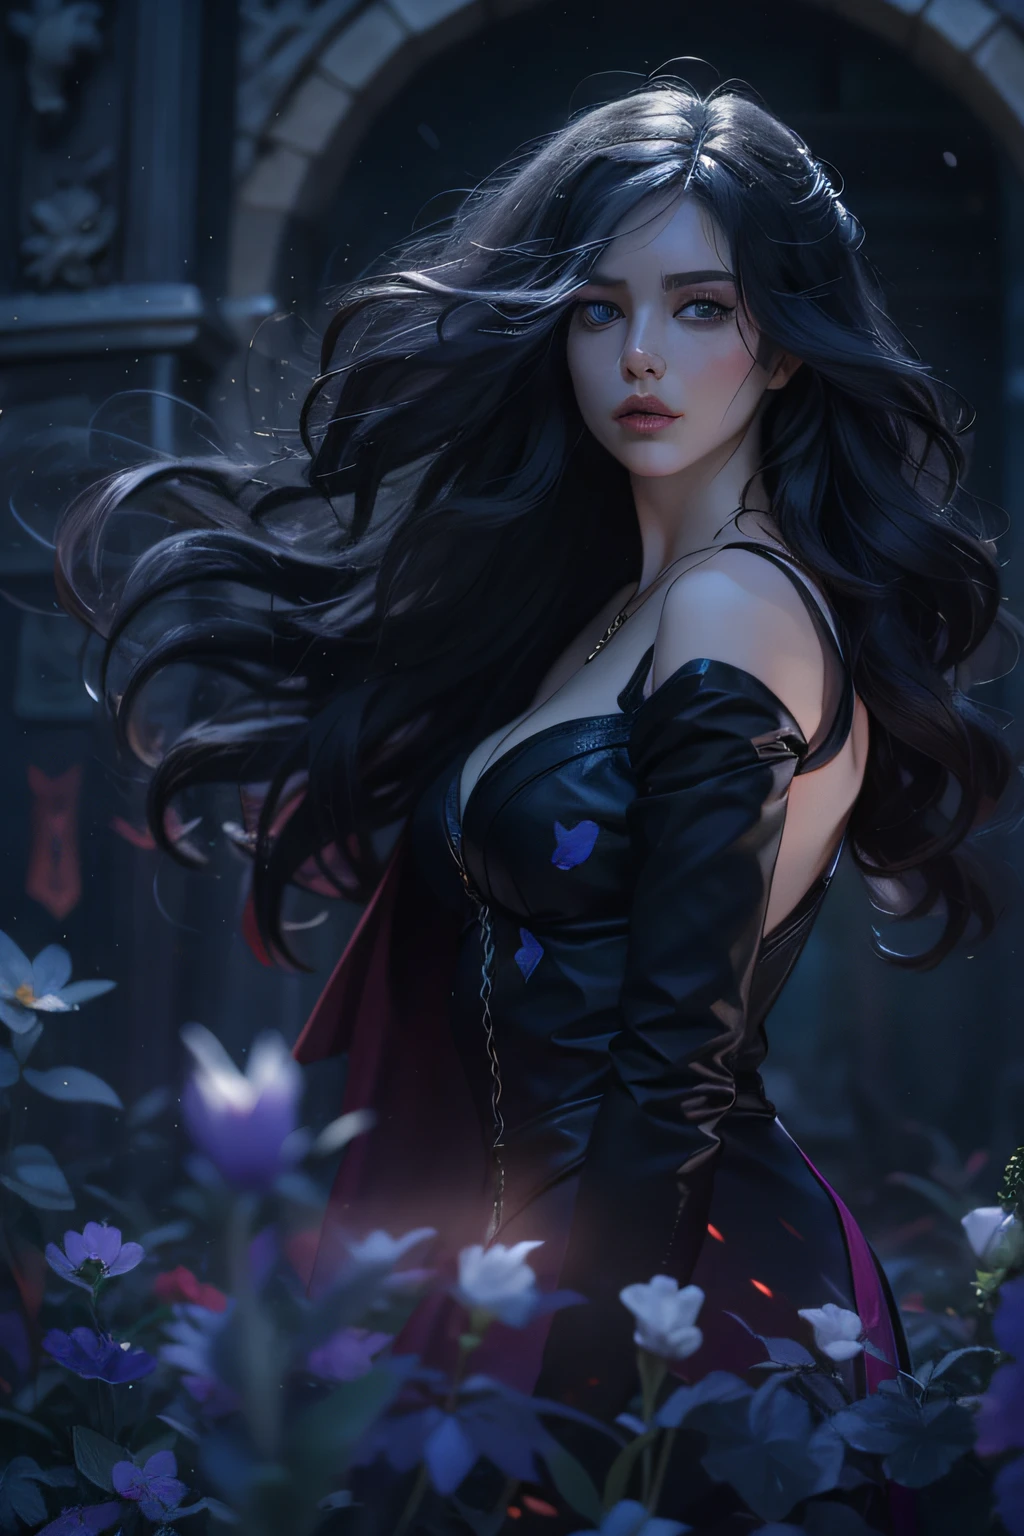 Beautiful woman reminiscent《the witcher》Yennefer in ，Long black hair and violet eyes as bright as constellations, tmasterpiece, hyper qualit, 8K, Hair fell on his shoulders, The background is a cemetery, She wore a black suit and tie.....